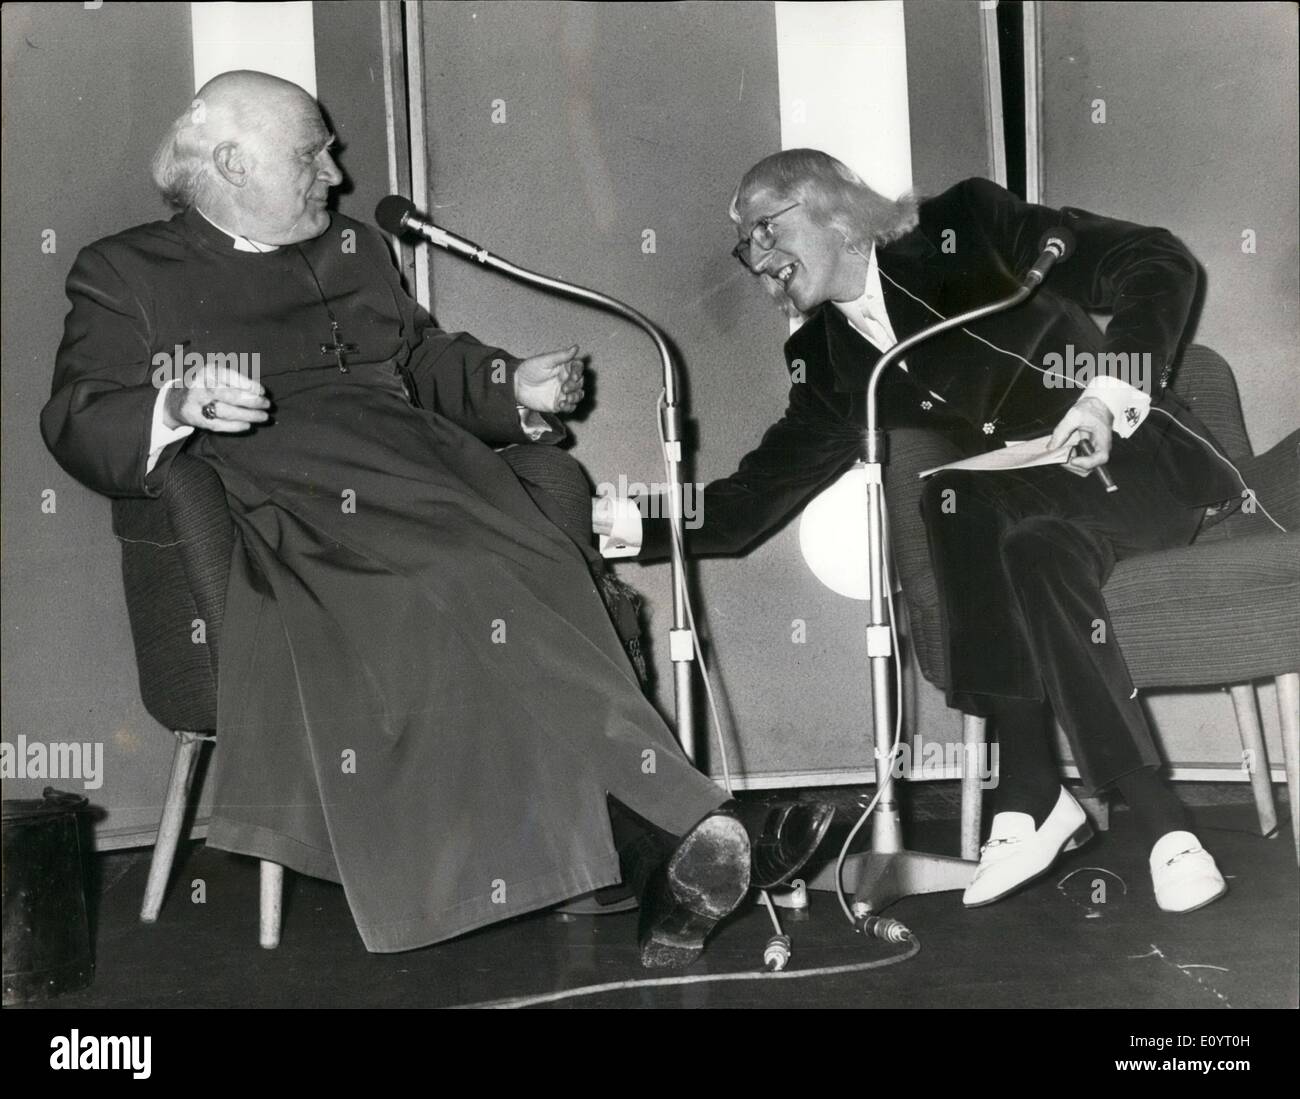 May 05, 1971 - Dr. Ramsey. Photo shows The Archbishop and Jimmy Saville seen enjoying a joke during the recording of the Speak Easy Programme last night. Stock Photo